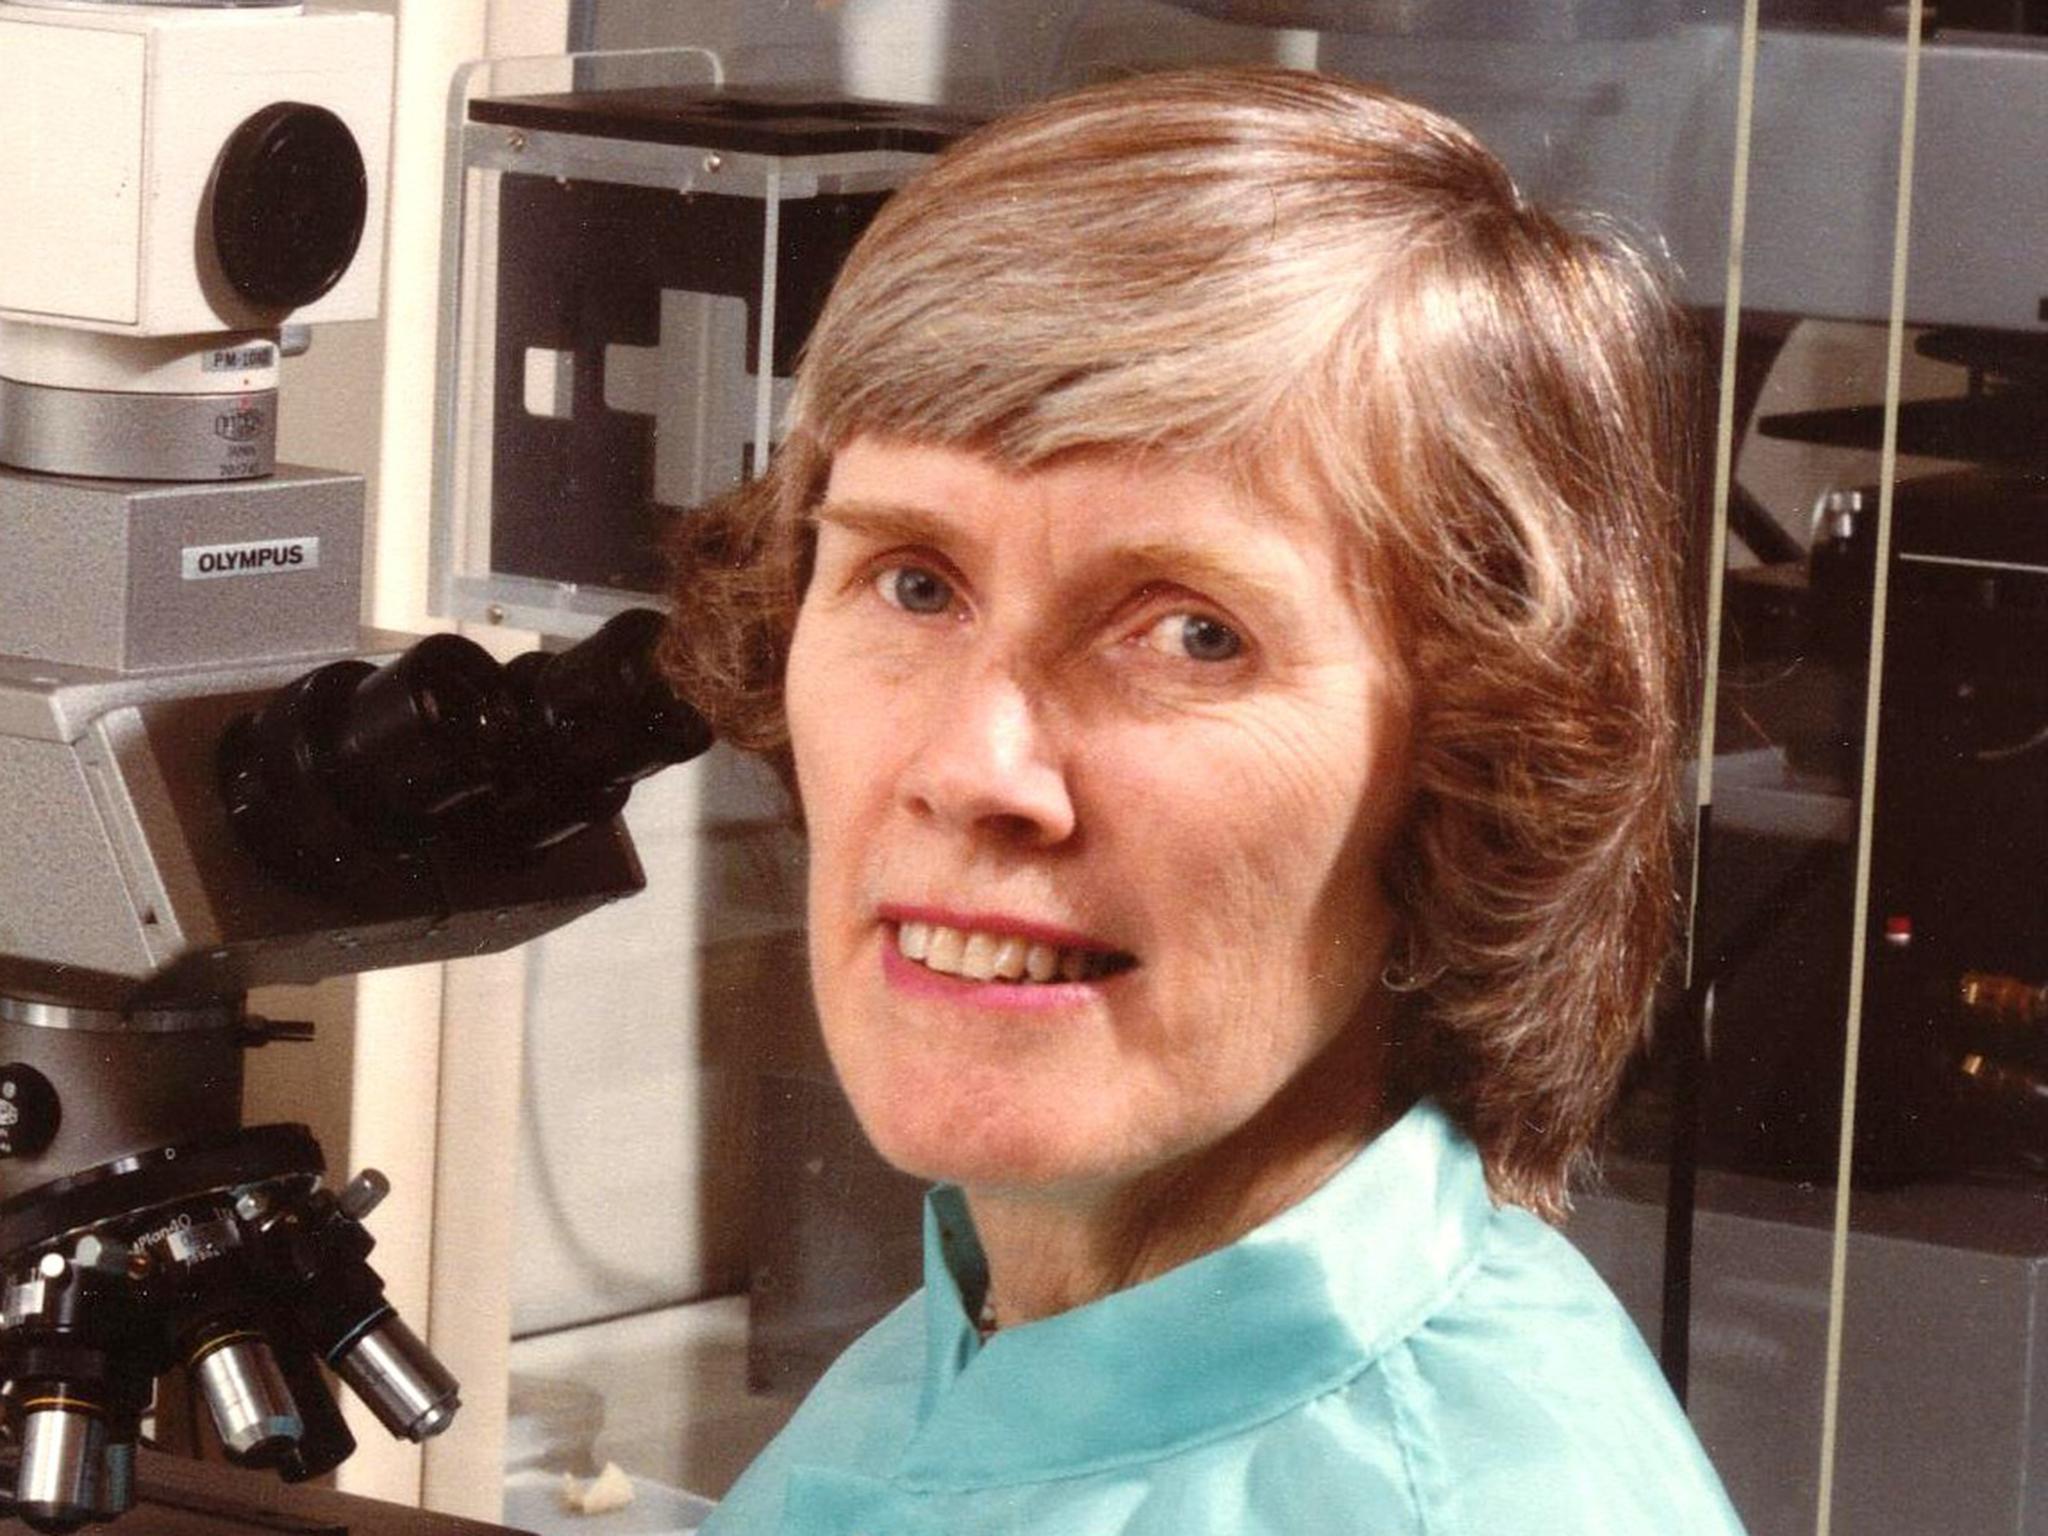 Lloyd excelled during an era when few women were able to choose science as a career